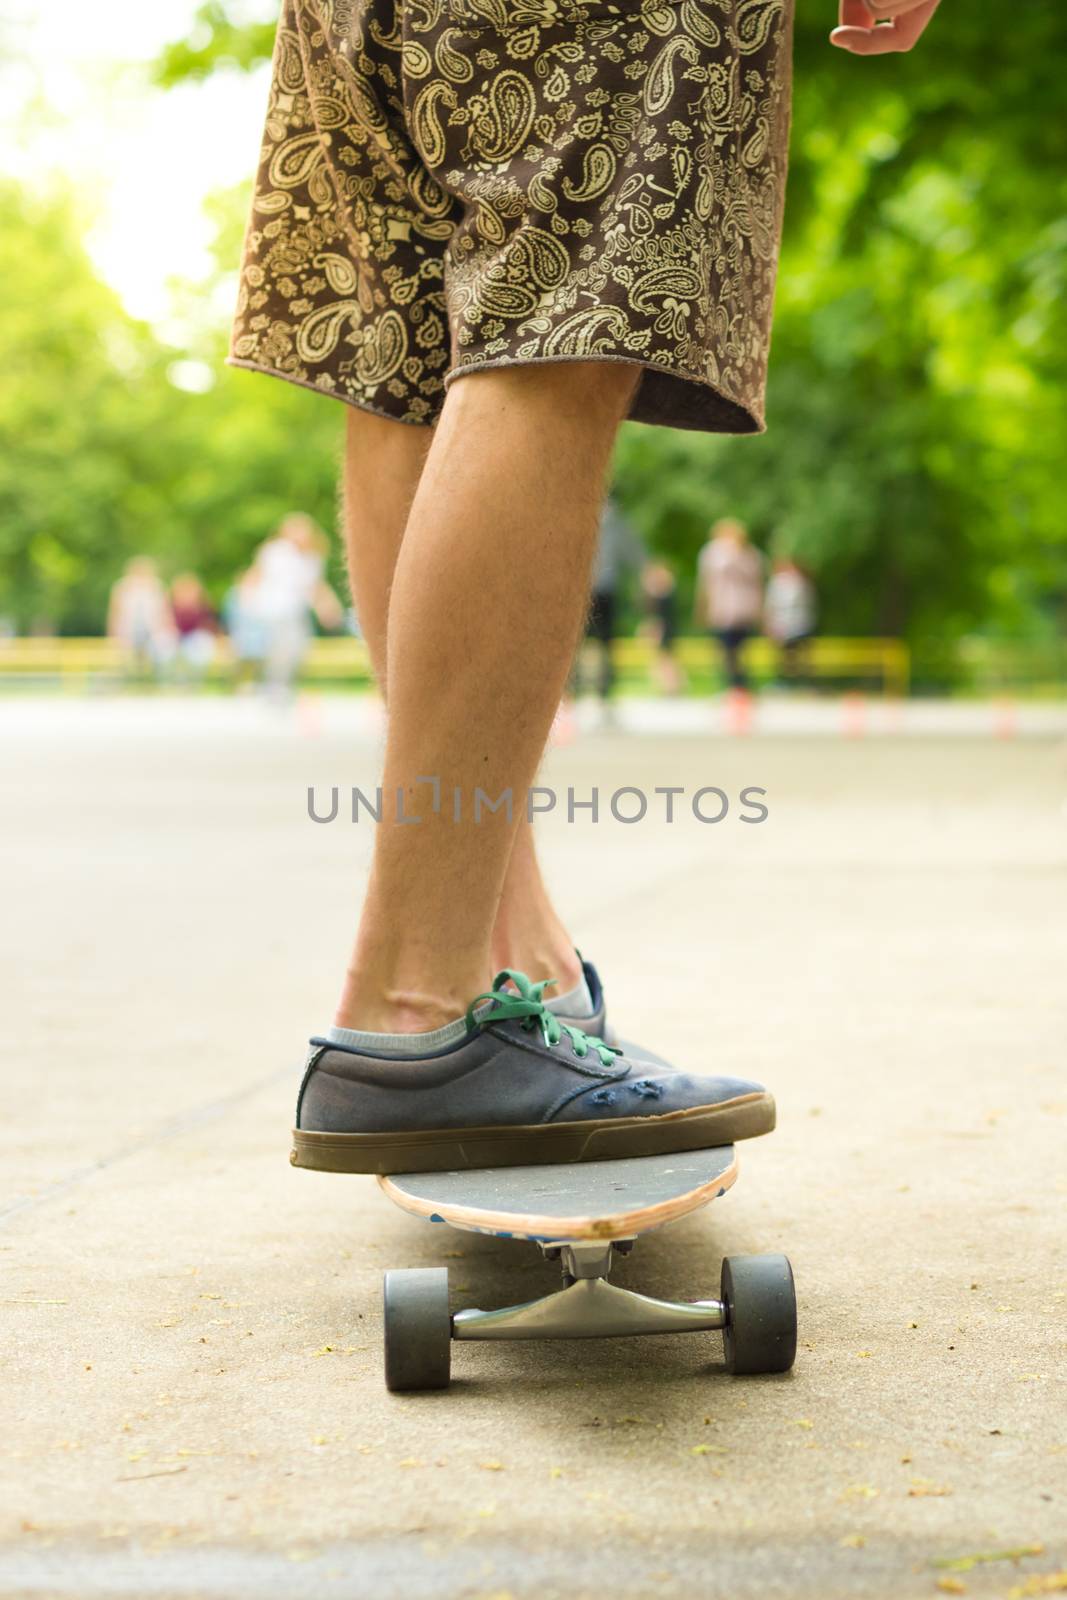 Guy wearing shorts and sneakers practicing long board riding in skateboarding park. Active urban life. Urban subculture.